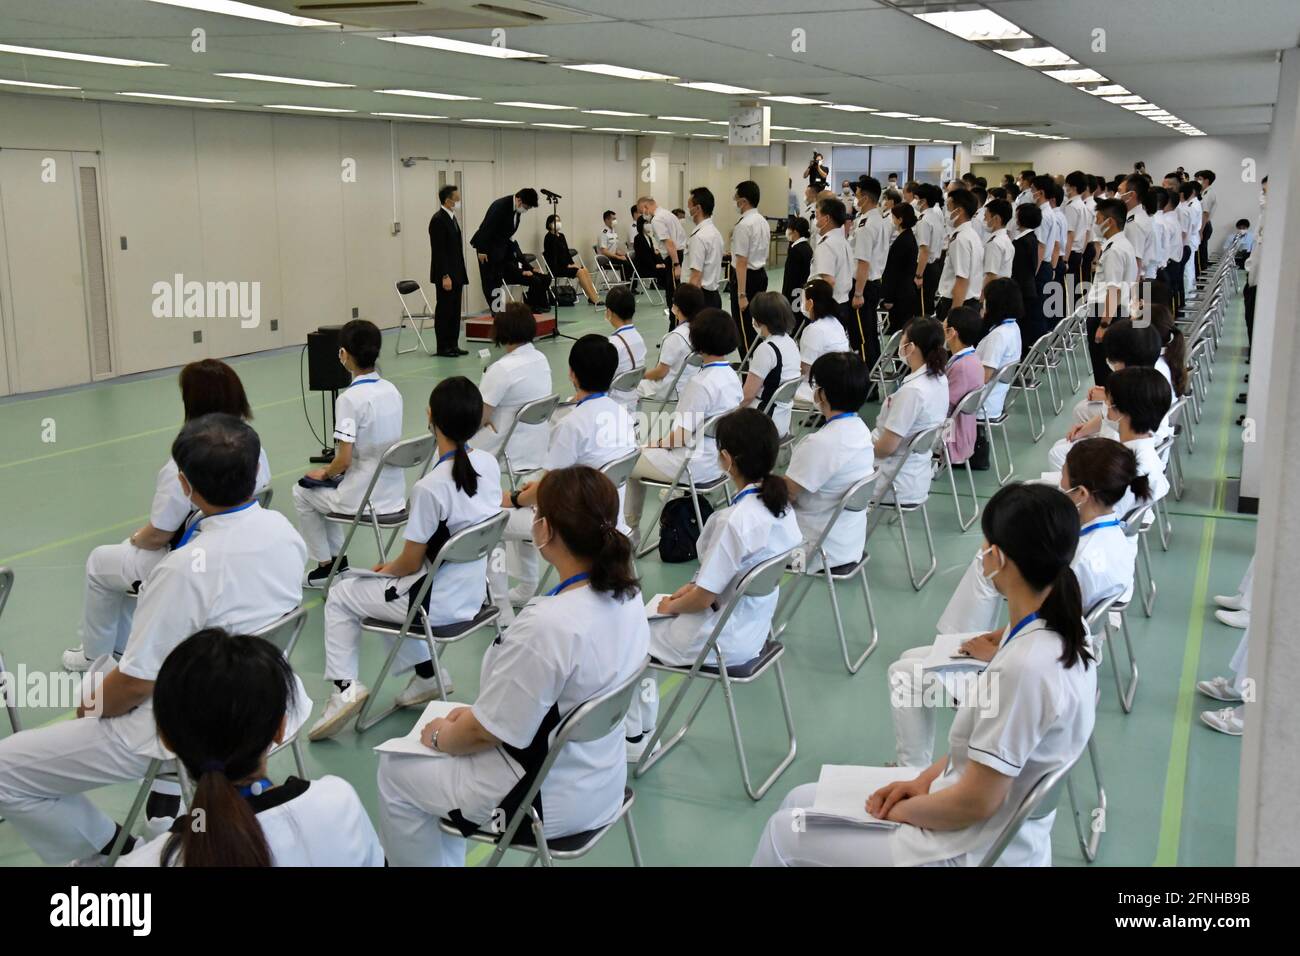 Tokyo, Japan. 17th May, 2021. Japan Self?Defense Forces' officer salute during a launch for large-scale Covid-19 vaccination centres in Tokyo, Japan on Monday, May 17, 2021. This centre will open on May 24, 2021. Tokyo operation units organize Ground, Air and Maritime Self?Defense Forces' (Army, Air force and Navy) 240 officer and private 110 medical worker out of 350 members. Photo by Keizo Mori/UPI Credit: UPI/Alamy Live News Stock Photo